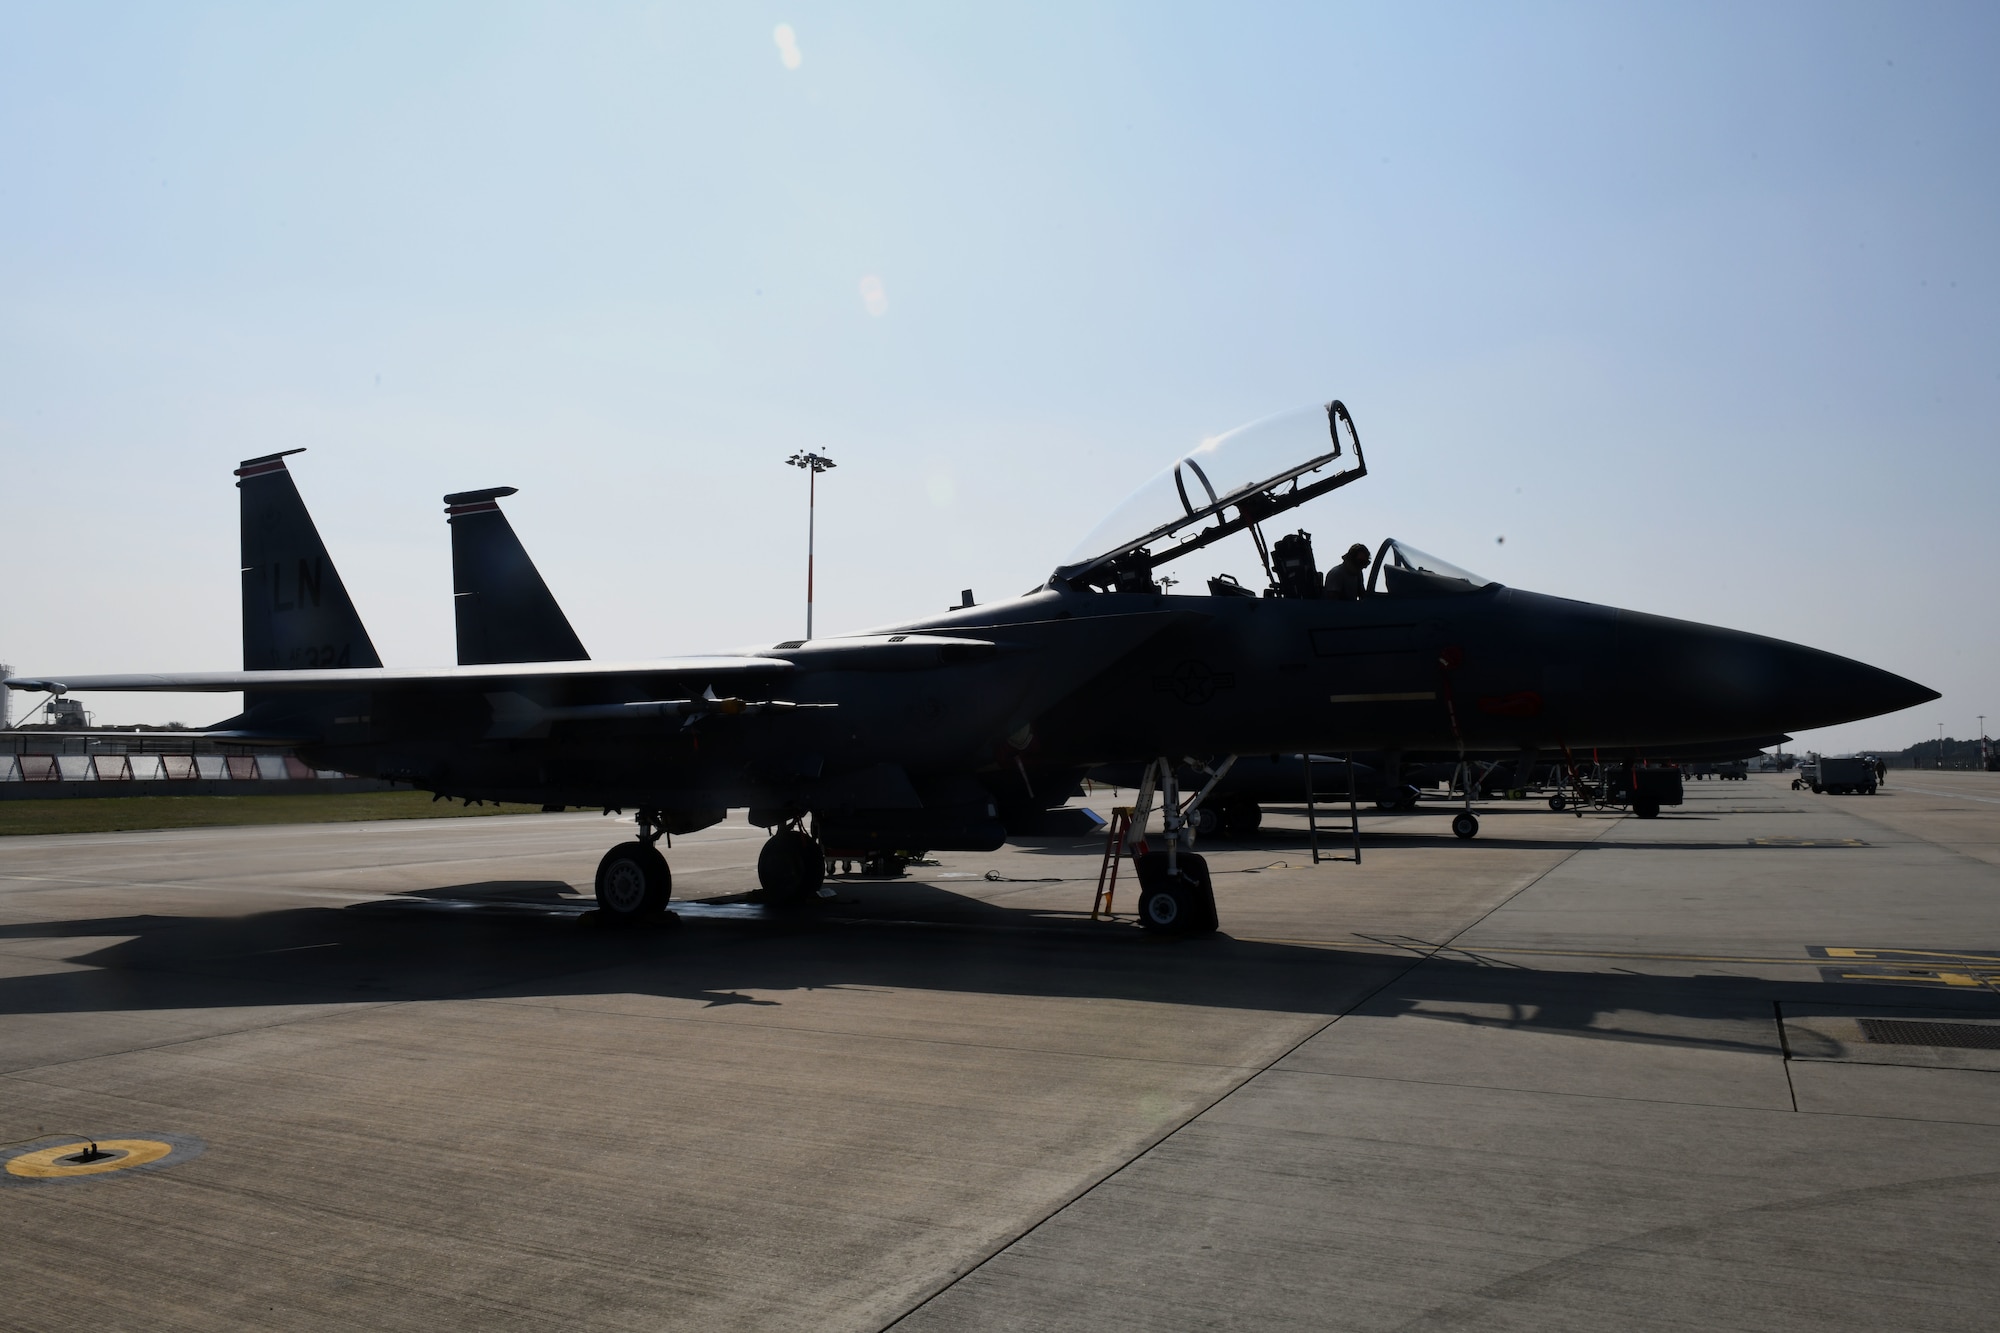 A 494th Aircraft Maintenance Unit crew chief cleans an F-15E Strike Eagle to prevent the spread of COVID-19 at Royal Air Force Lakenheath, England, April 16, 2020. The task requires everything inside the cockpit to be sanitized, to include any tool, button or switch the aircrew may have come in contact with during their flight. (U.S. Air Force photo by Senior Airman Christopher S. Sparks)